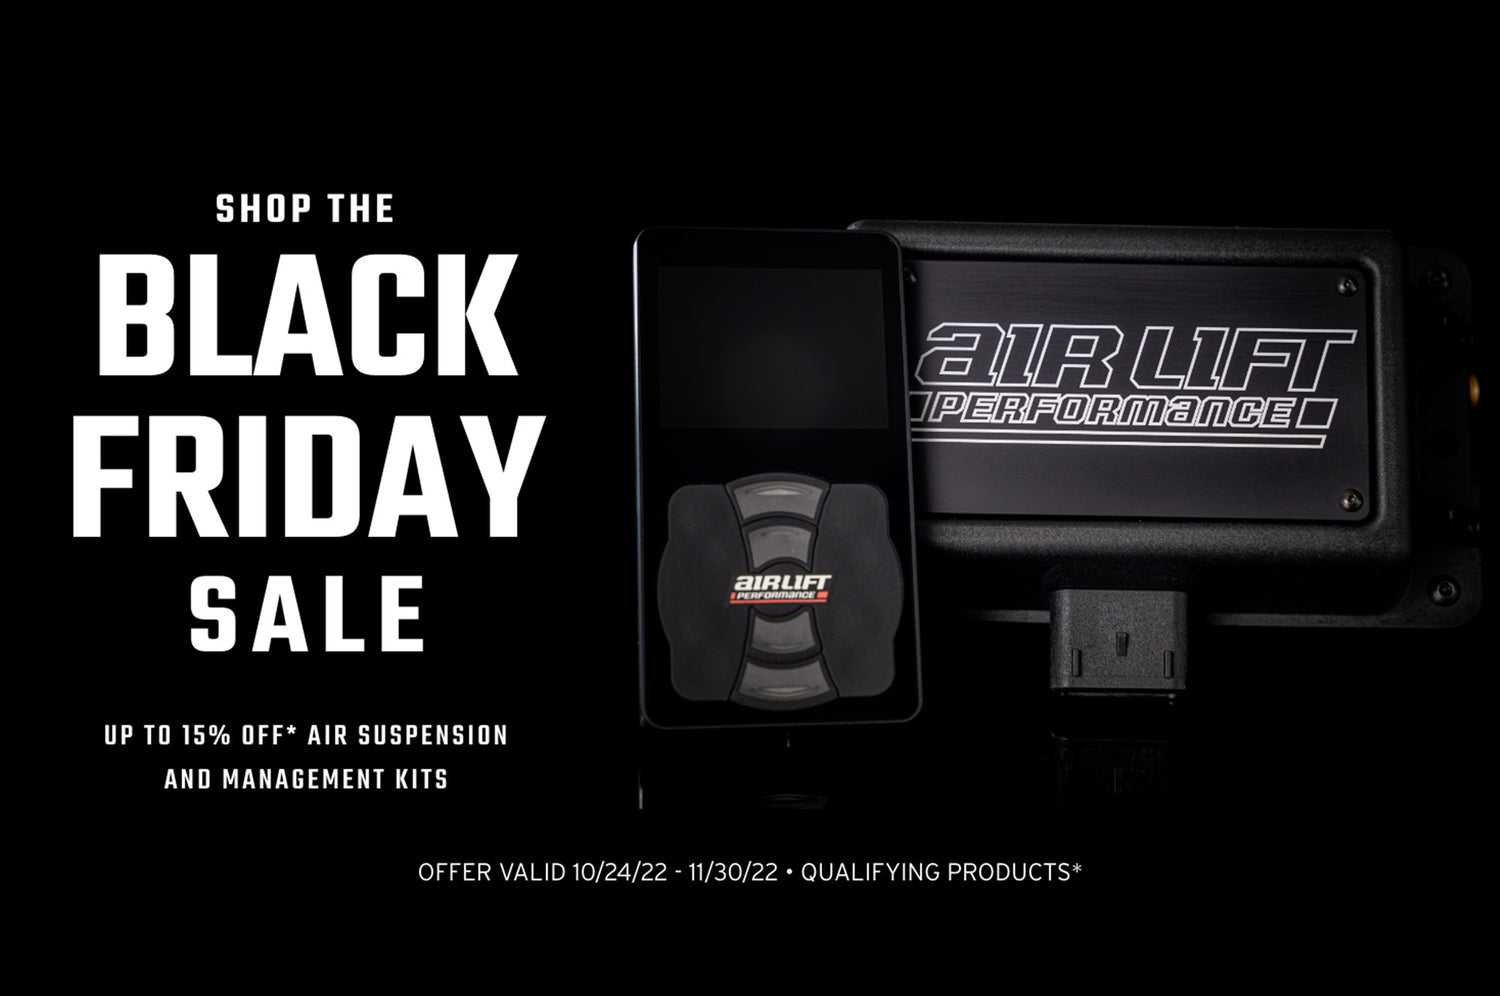 Air Lift's Black Friday sale has started!